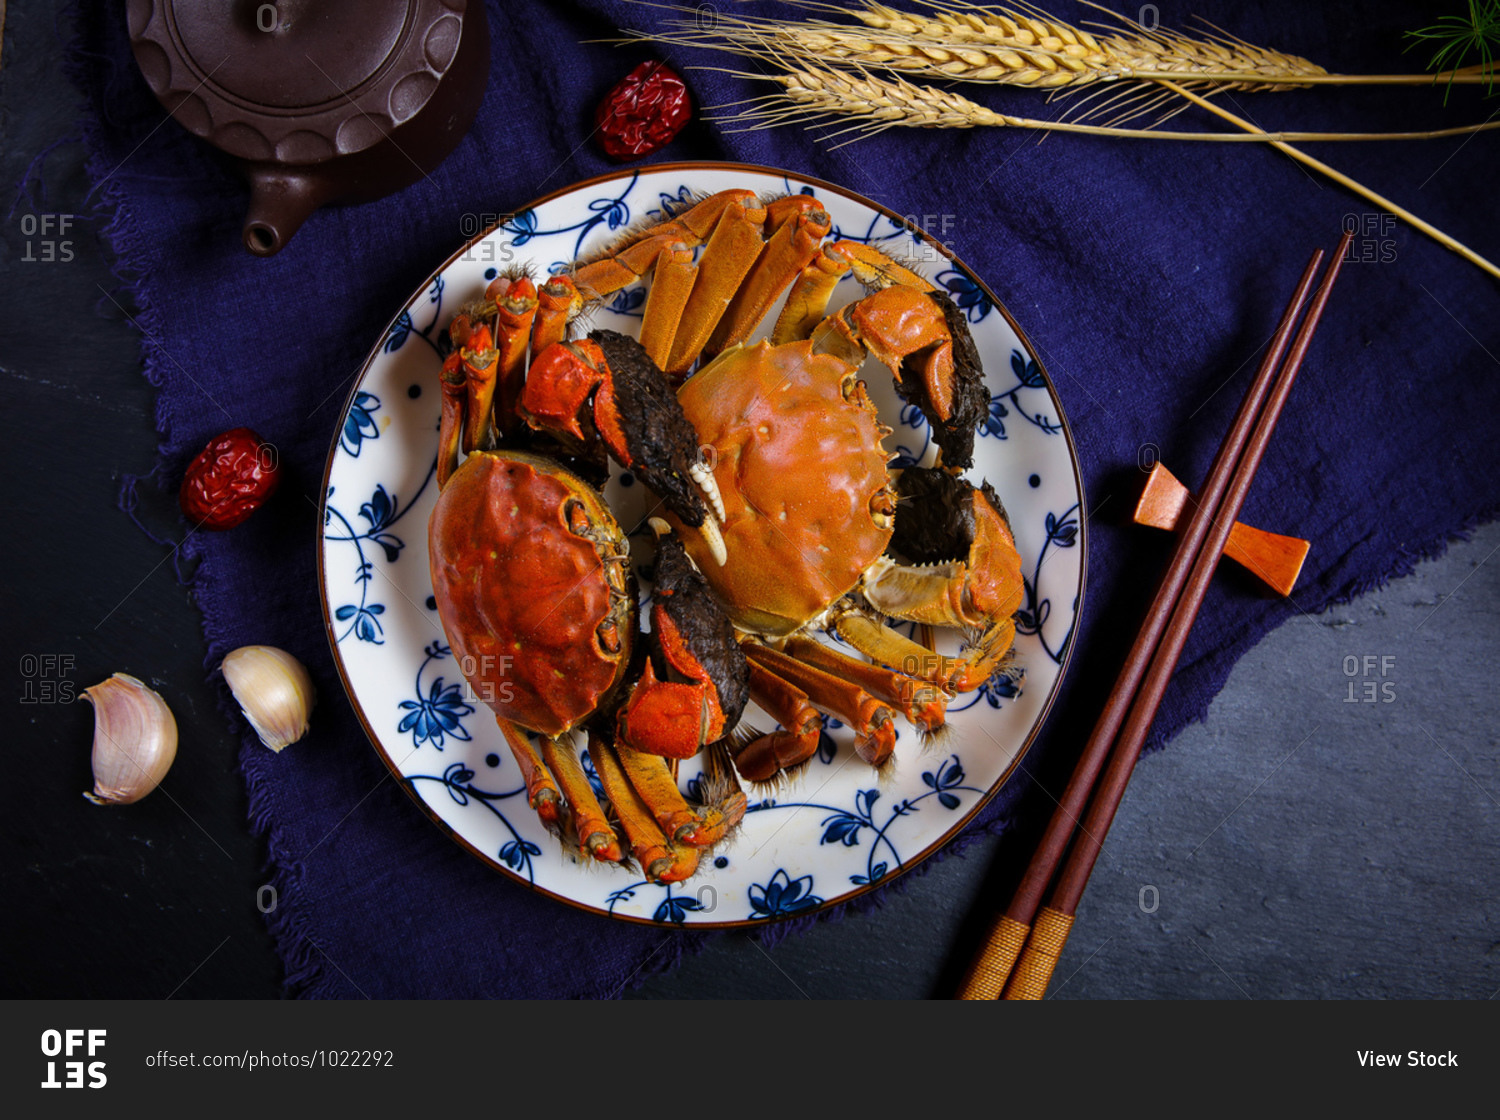 A crab set out on a plate